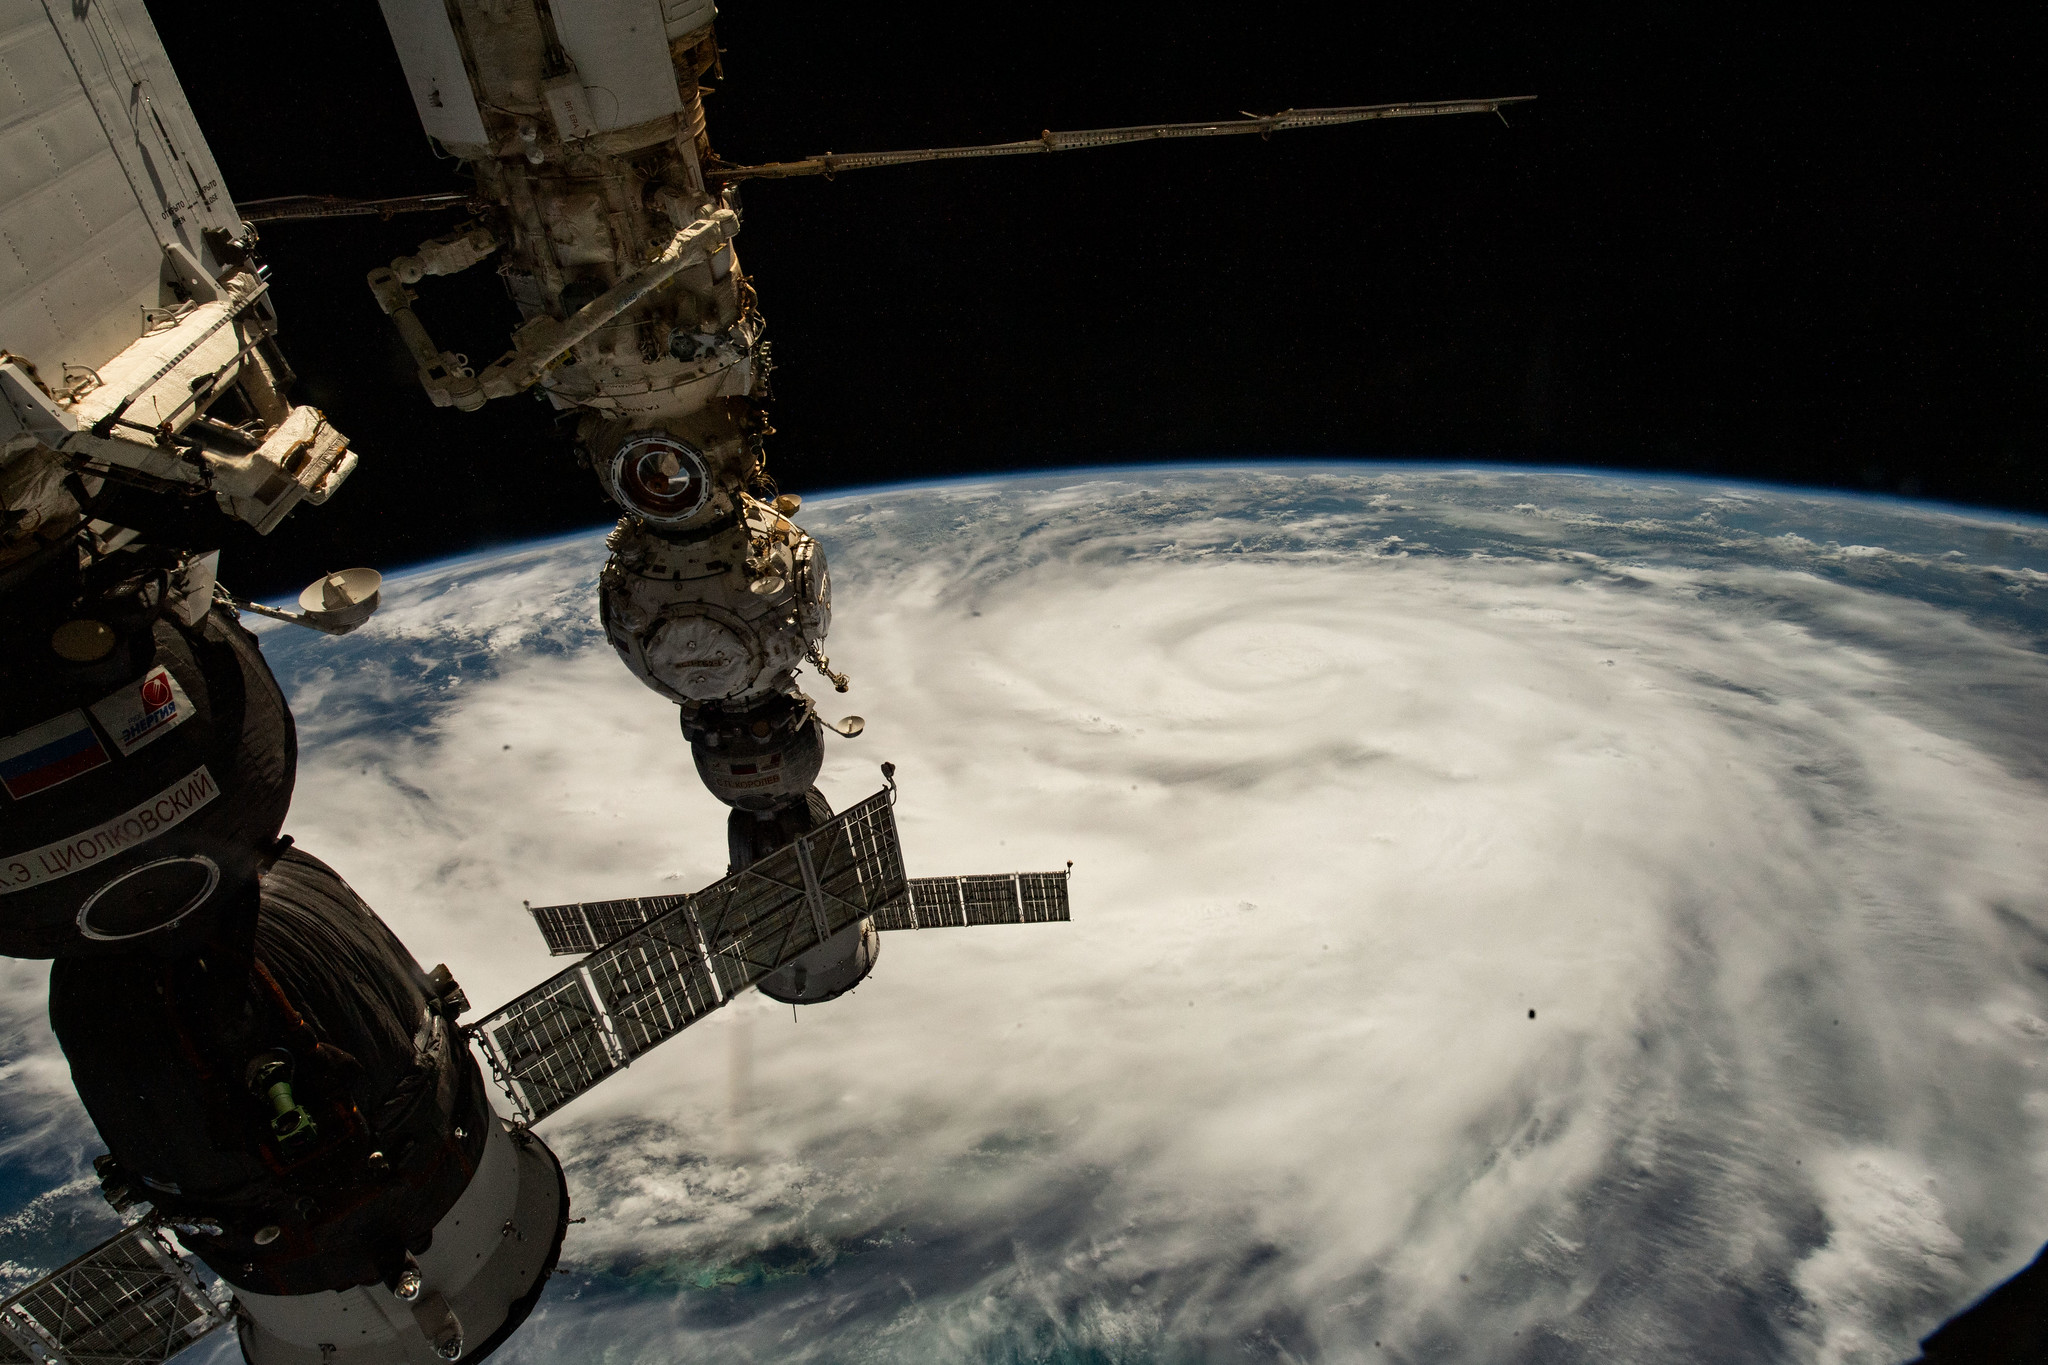 image of Hurricane Ian as seen from the space station